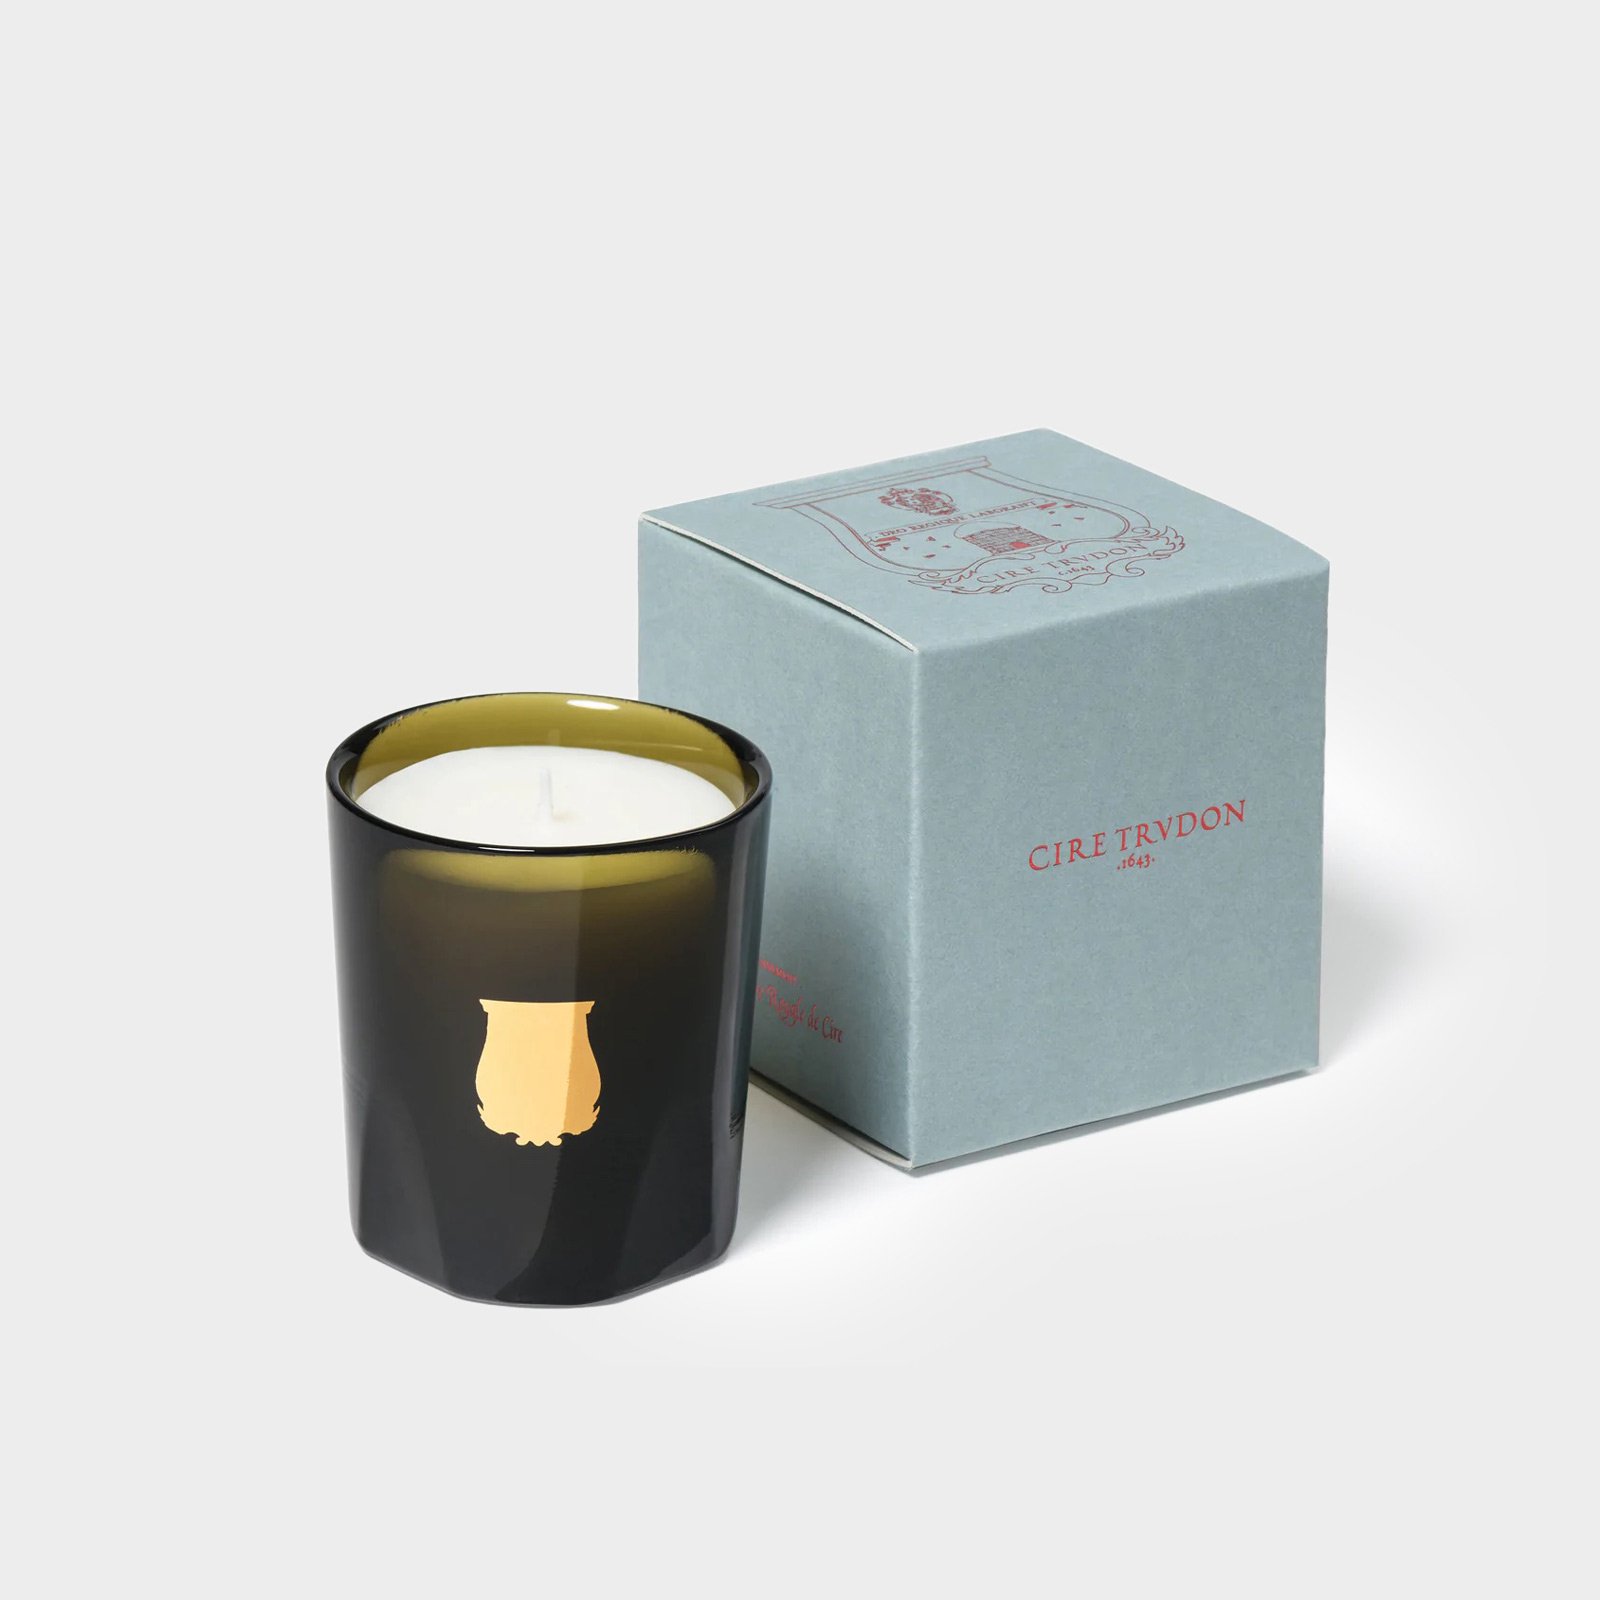 Trudon TUILERIES Candle (Floral & fruity chypre) -Limited Edition ...